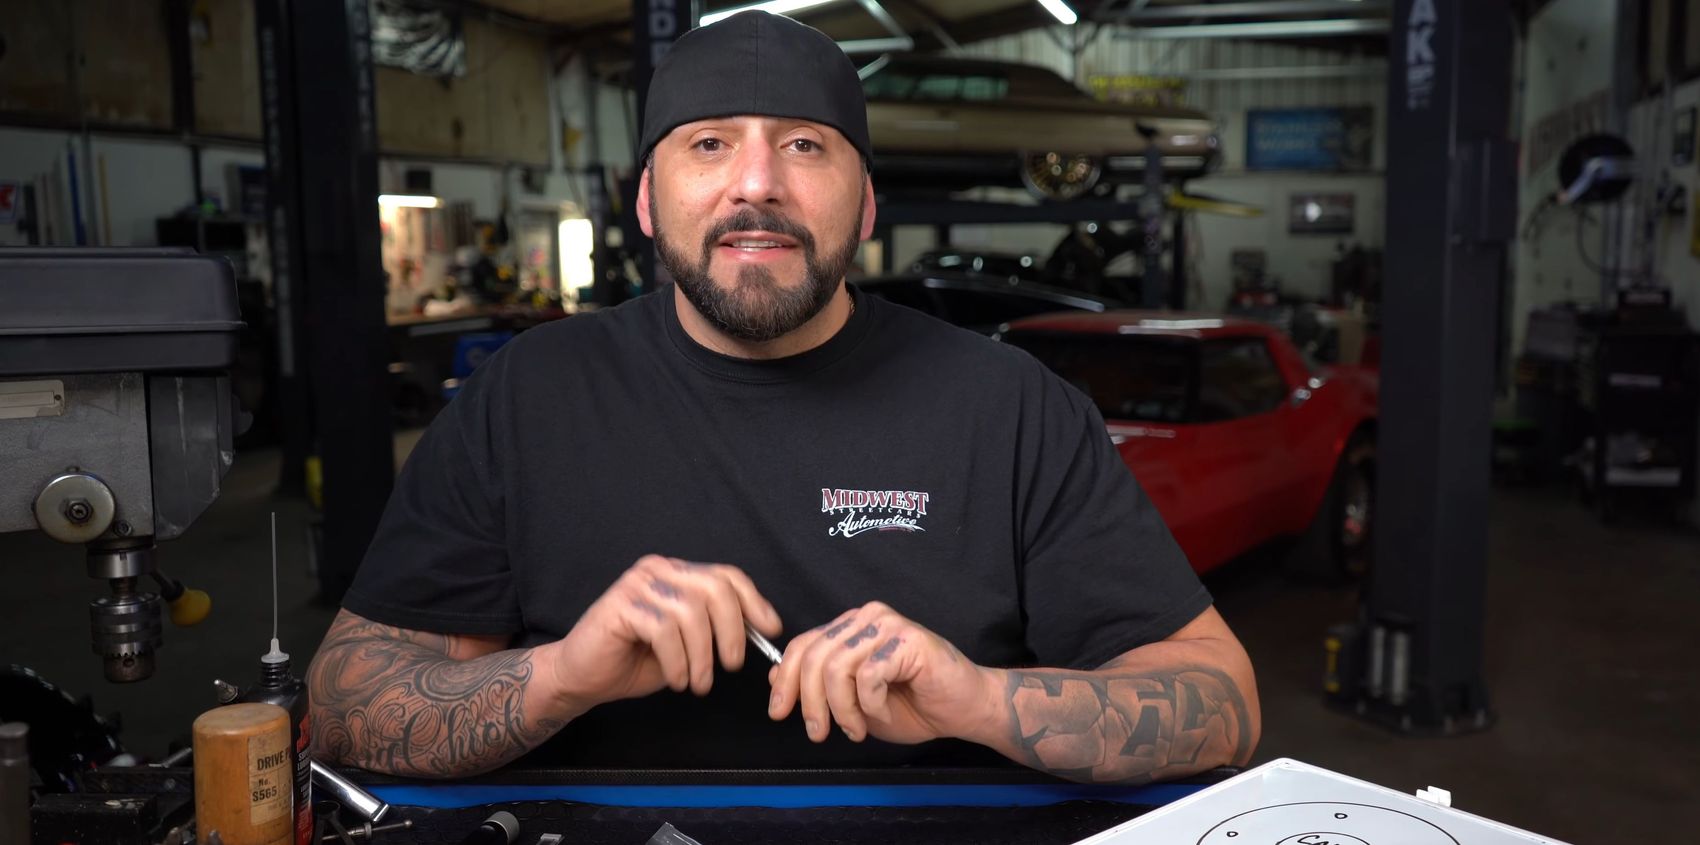 What Happened to Big Chief on Street Outlaws